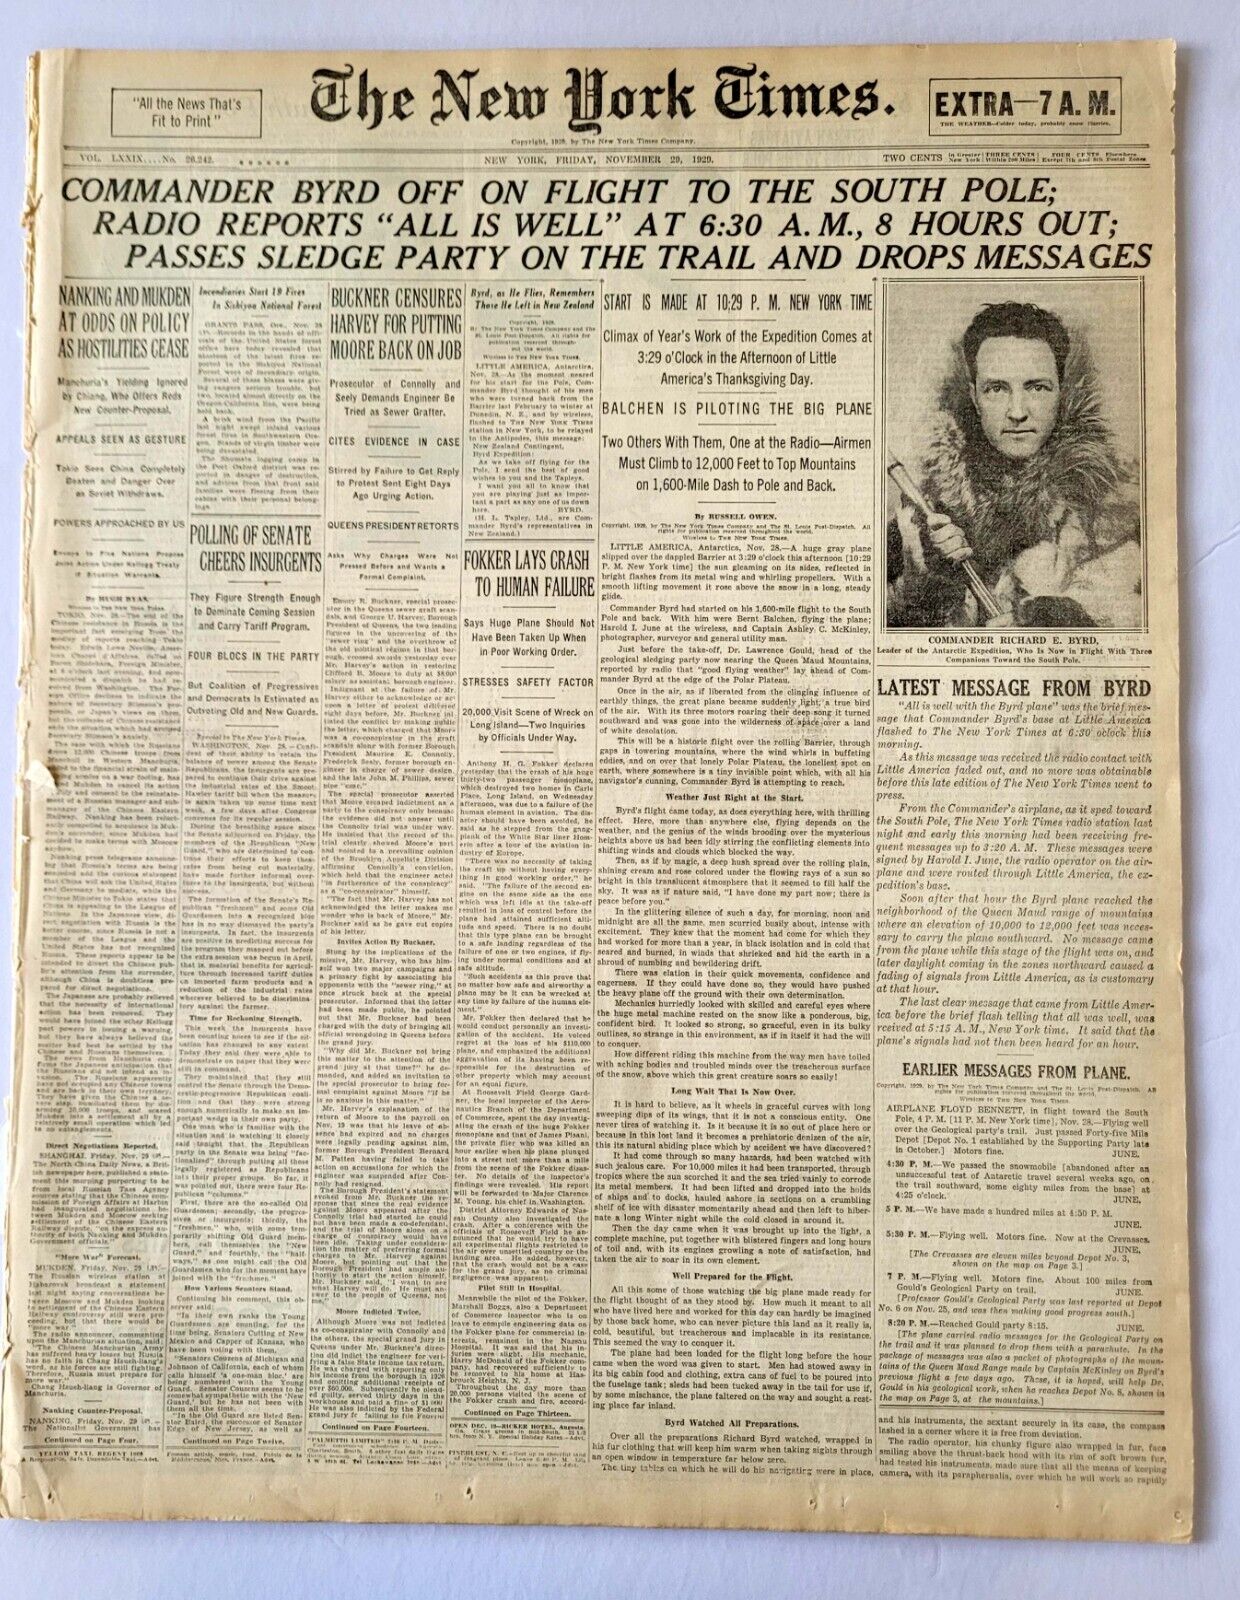 NEWSPAPER – NOV 1929 NY TIMES- ADMIRAL BRYD FLIGHT TO SOUTH POLE –COMPLETE ISSUE